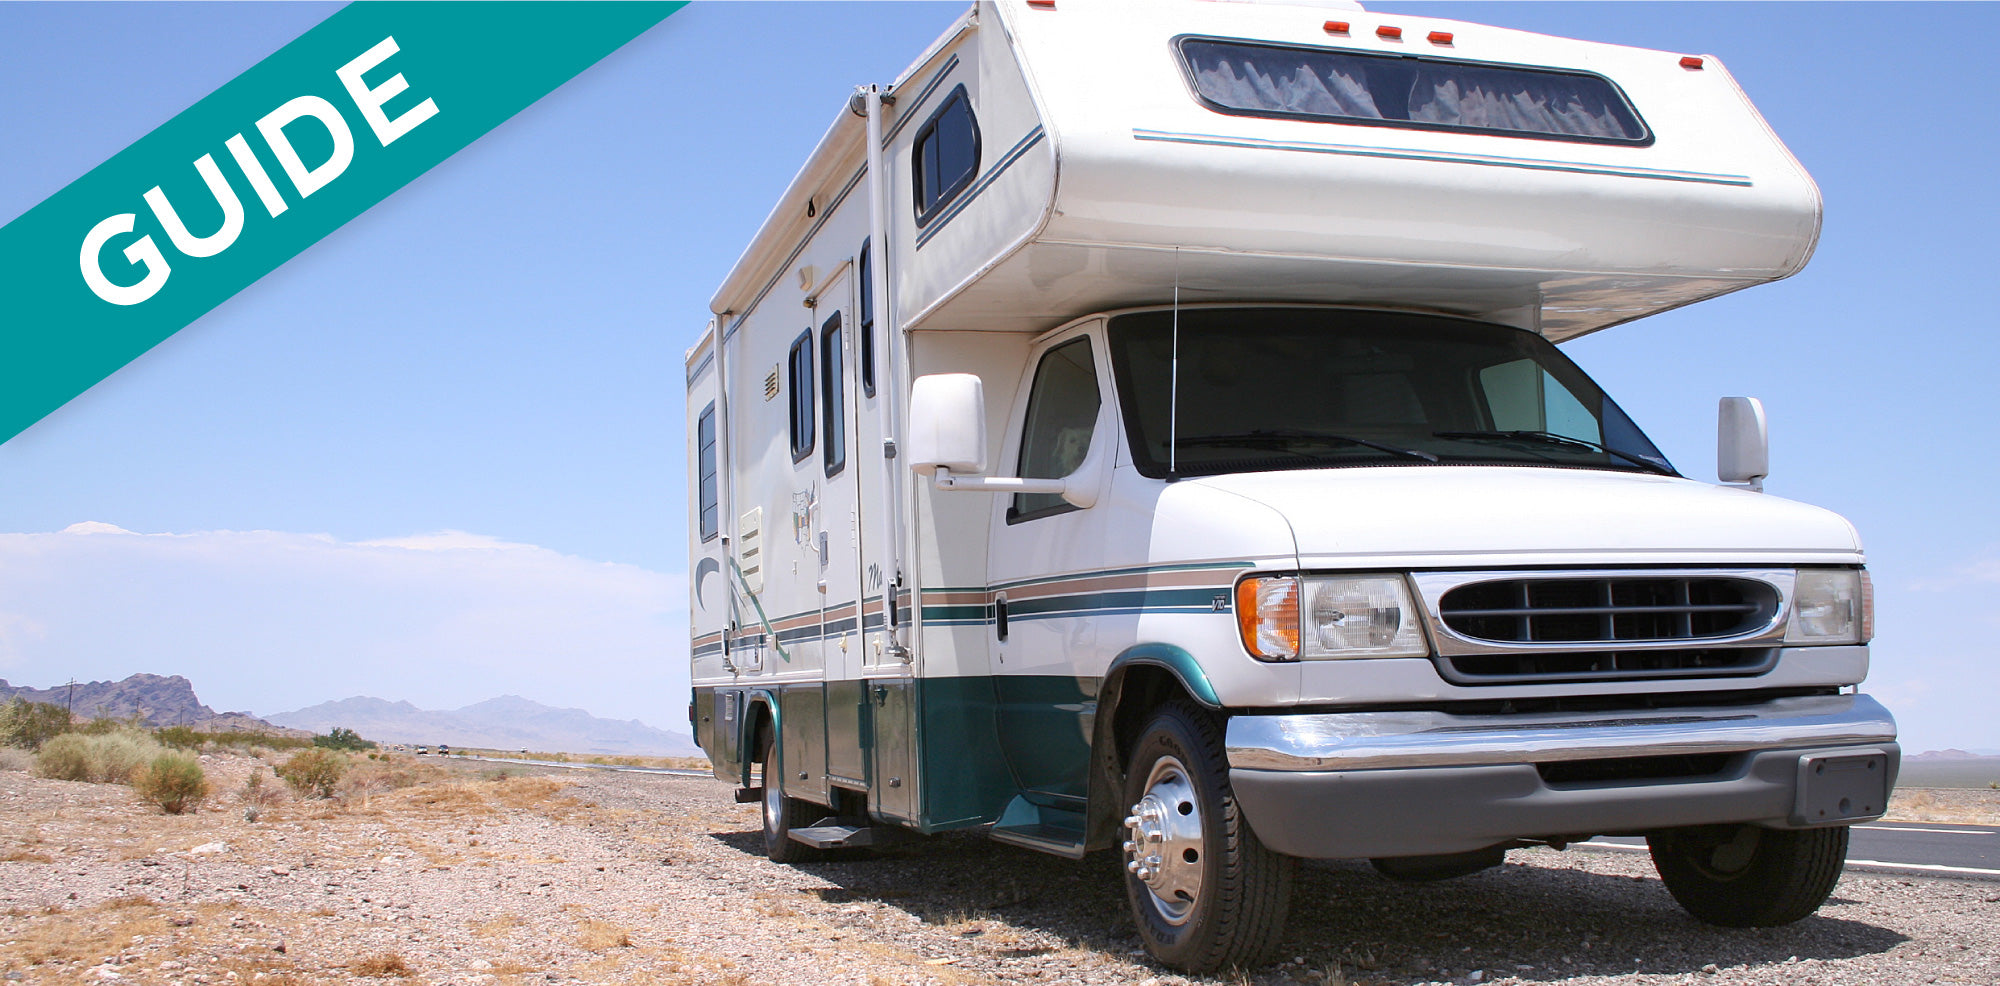 How to Control RV Holding Tanks Smells in High Heat